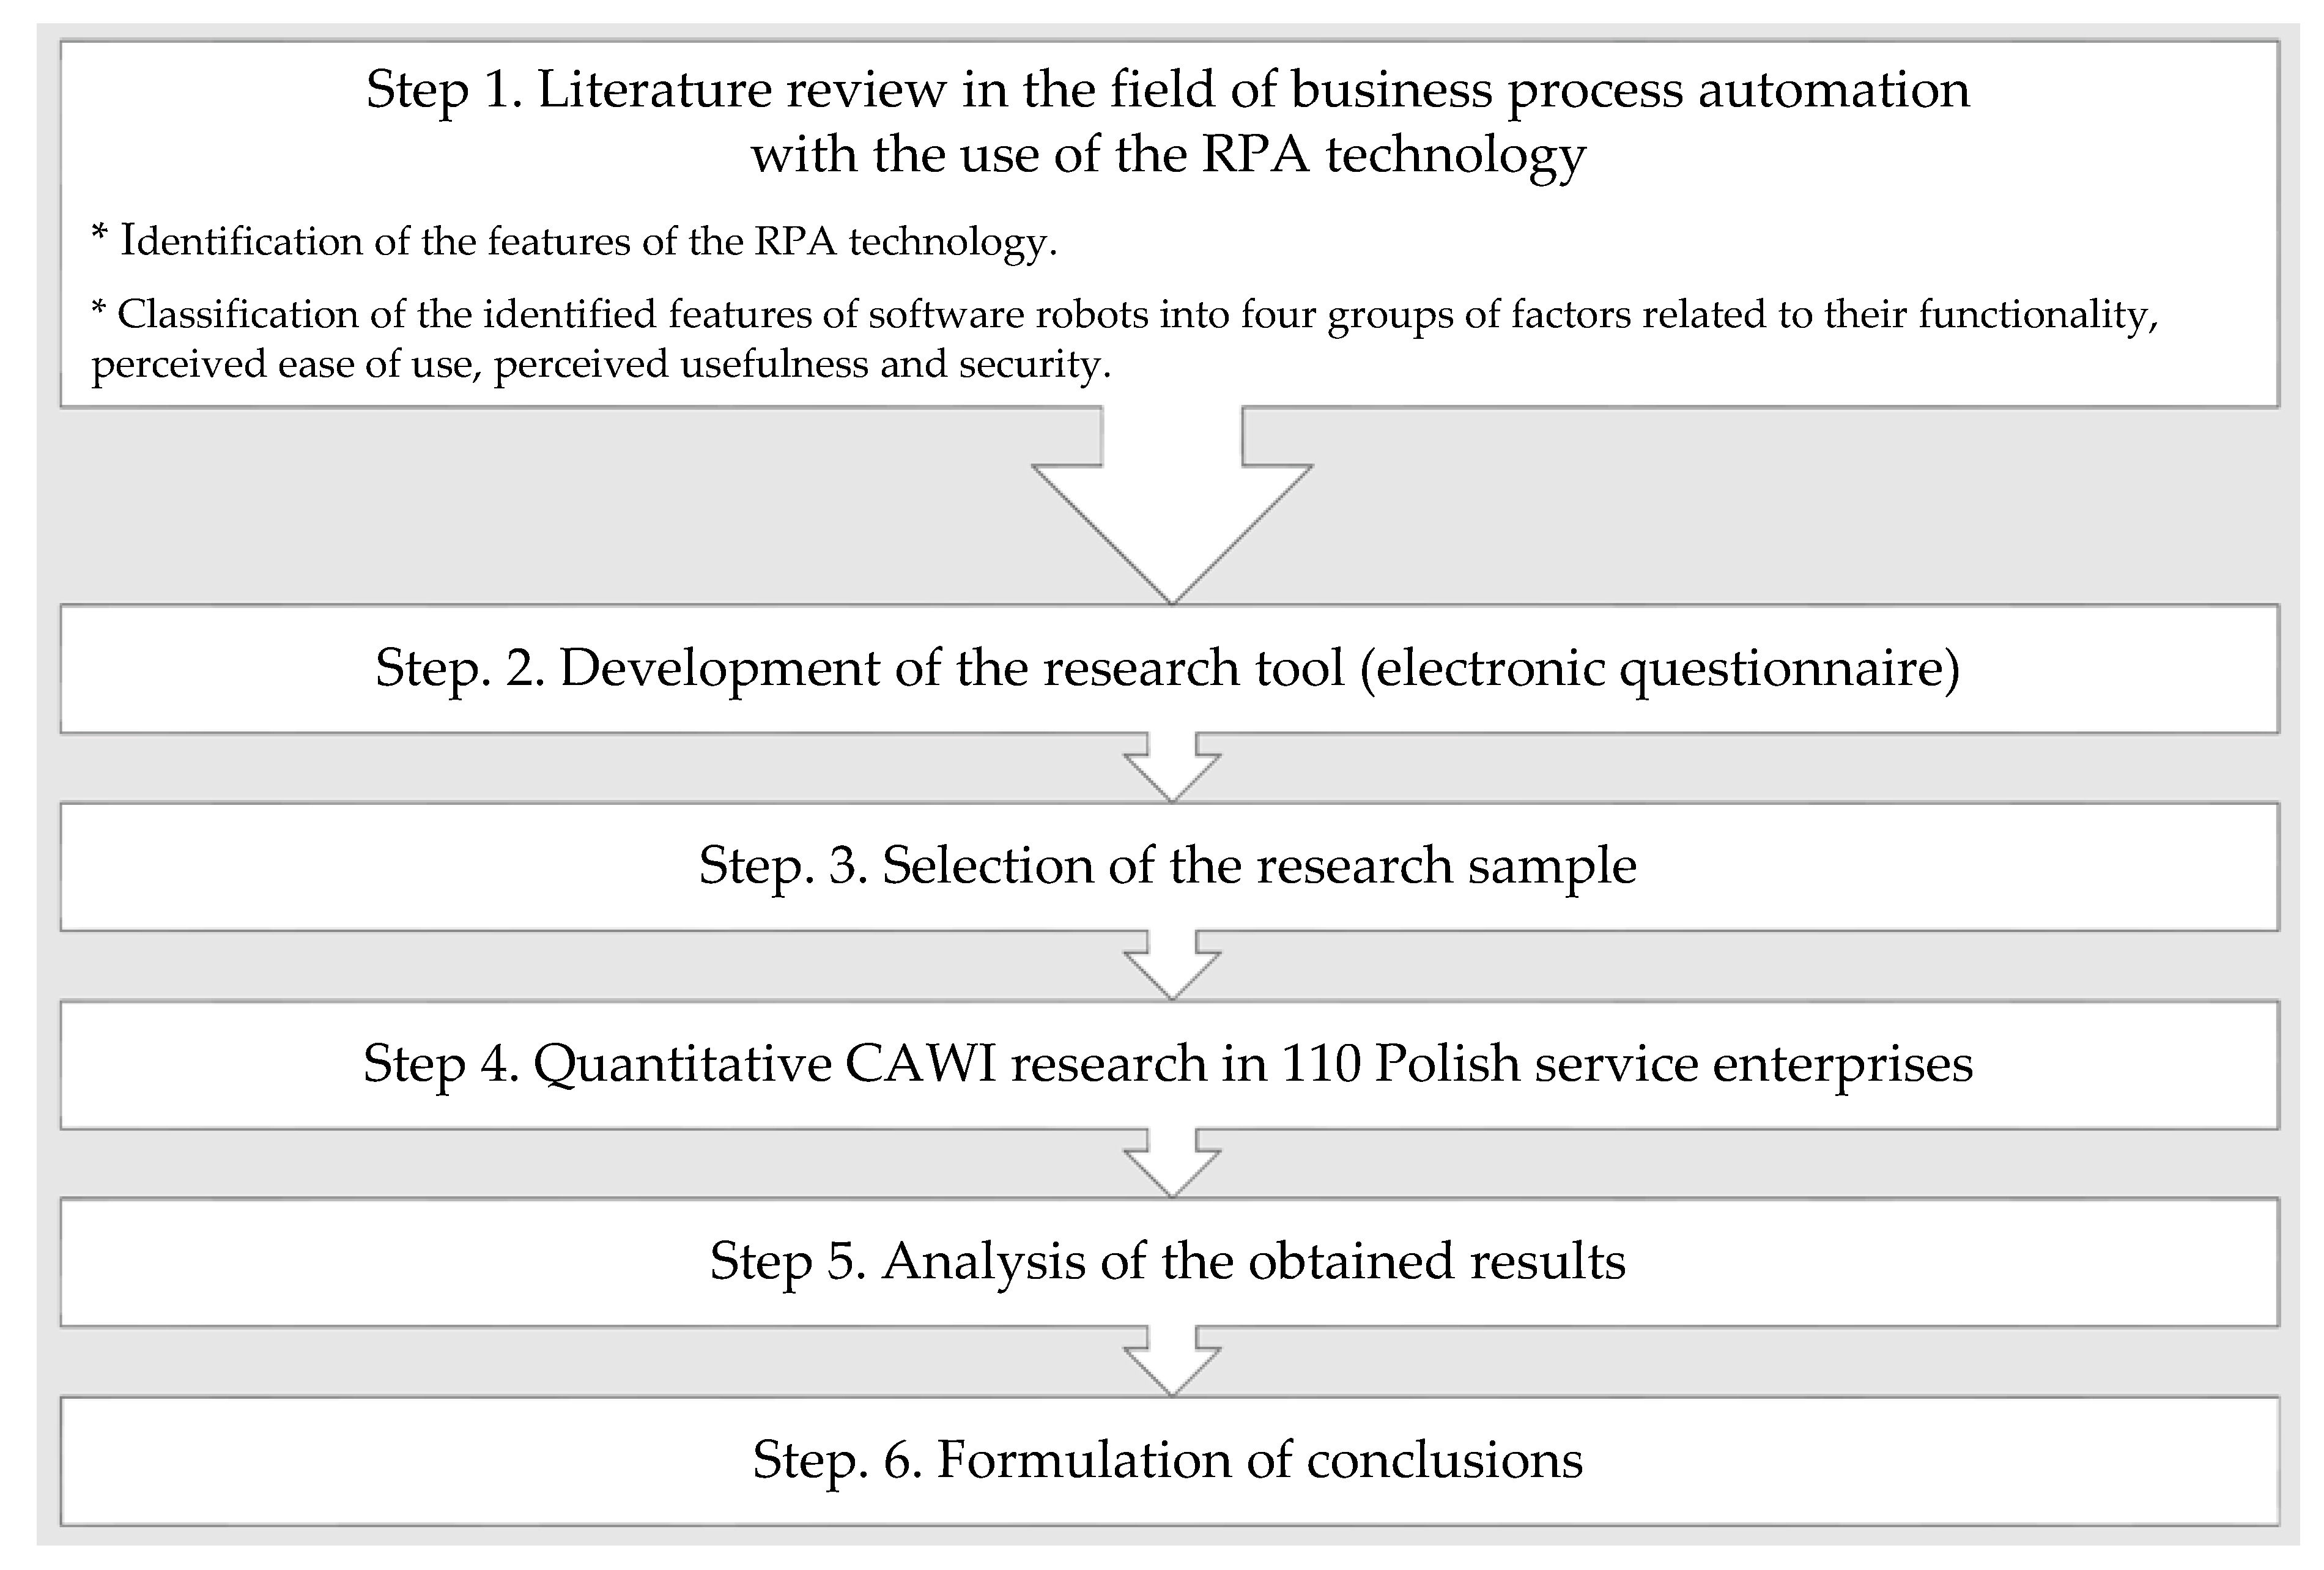 Sustainability | Free Full-Text | The Adoption of Robotic Process Automation  Technology to Ensure Business Processes during the COVID-19 Pandemic | HTML